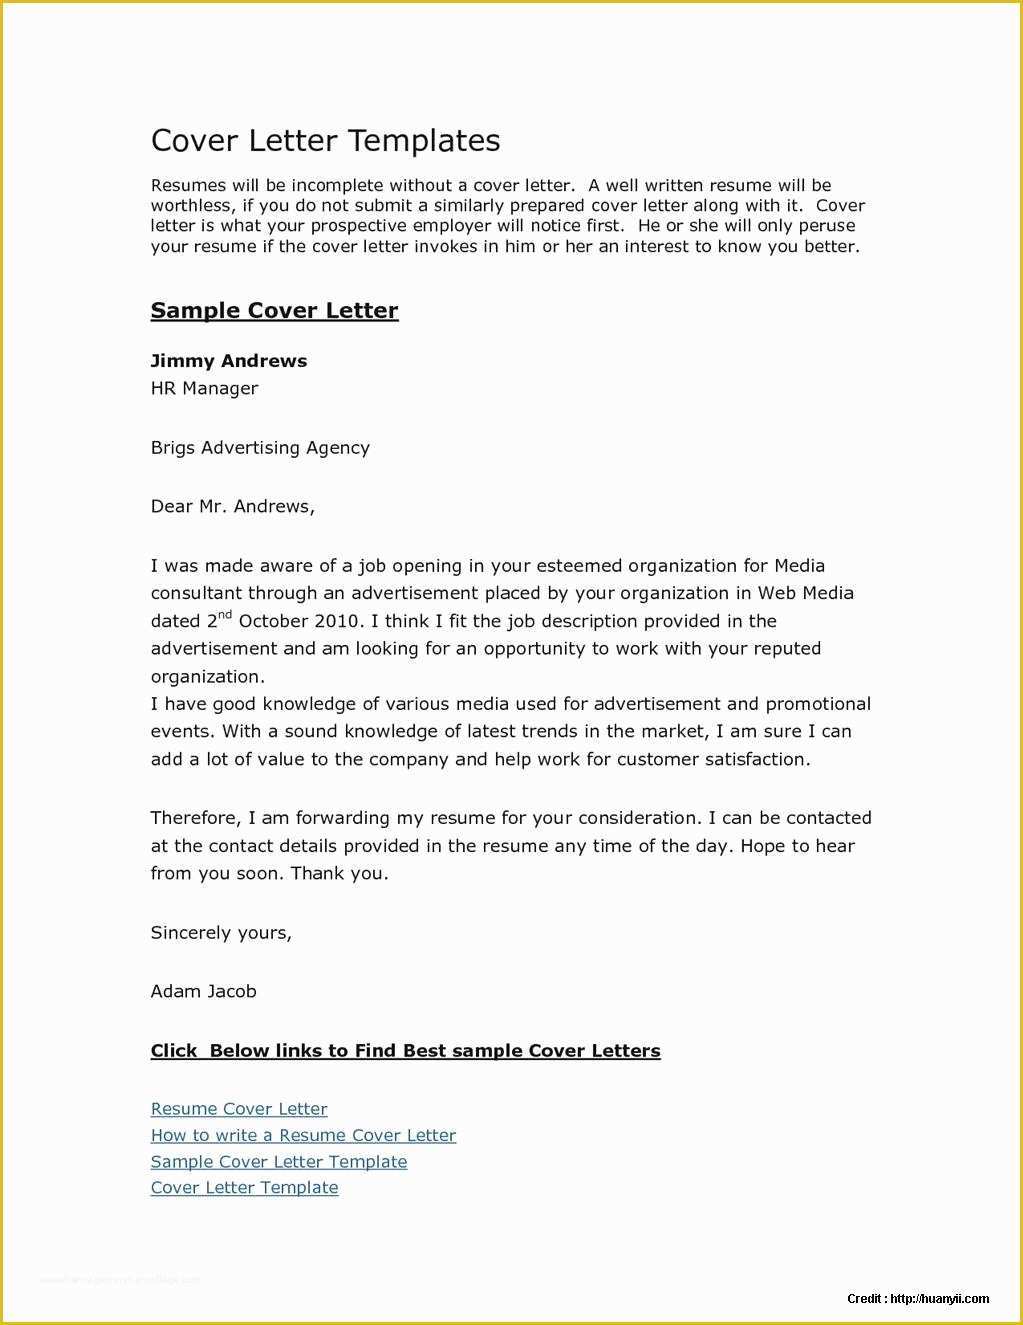 Free Resume and Cover Letter Templates Of Free Cover Letter Templates Microsoft Download Cover